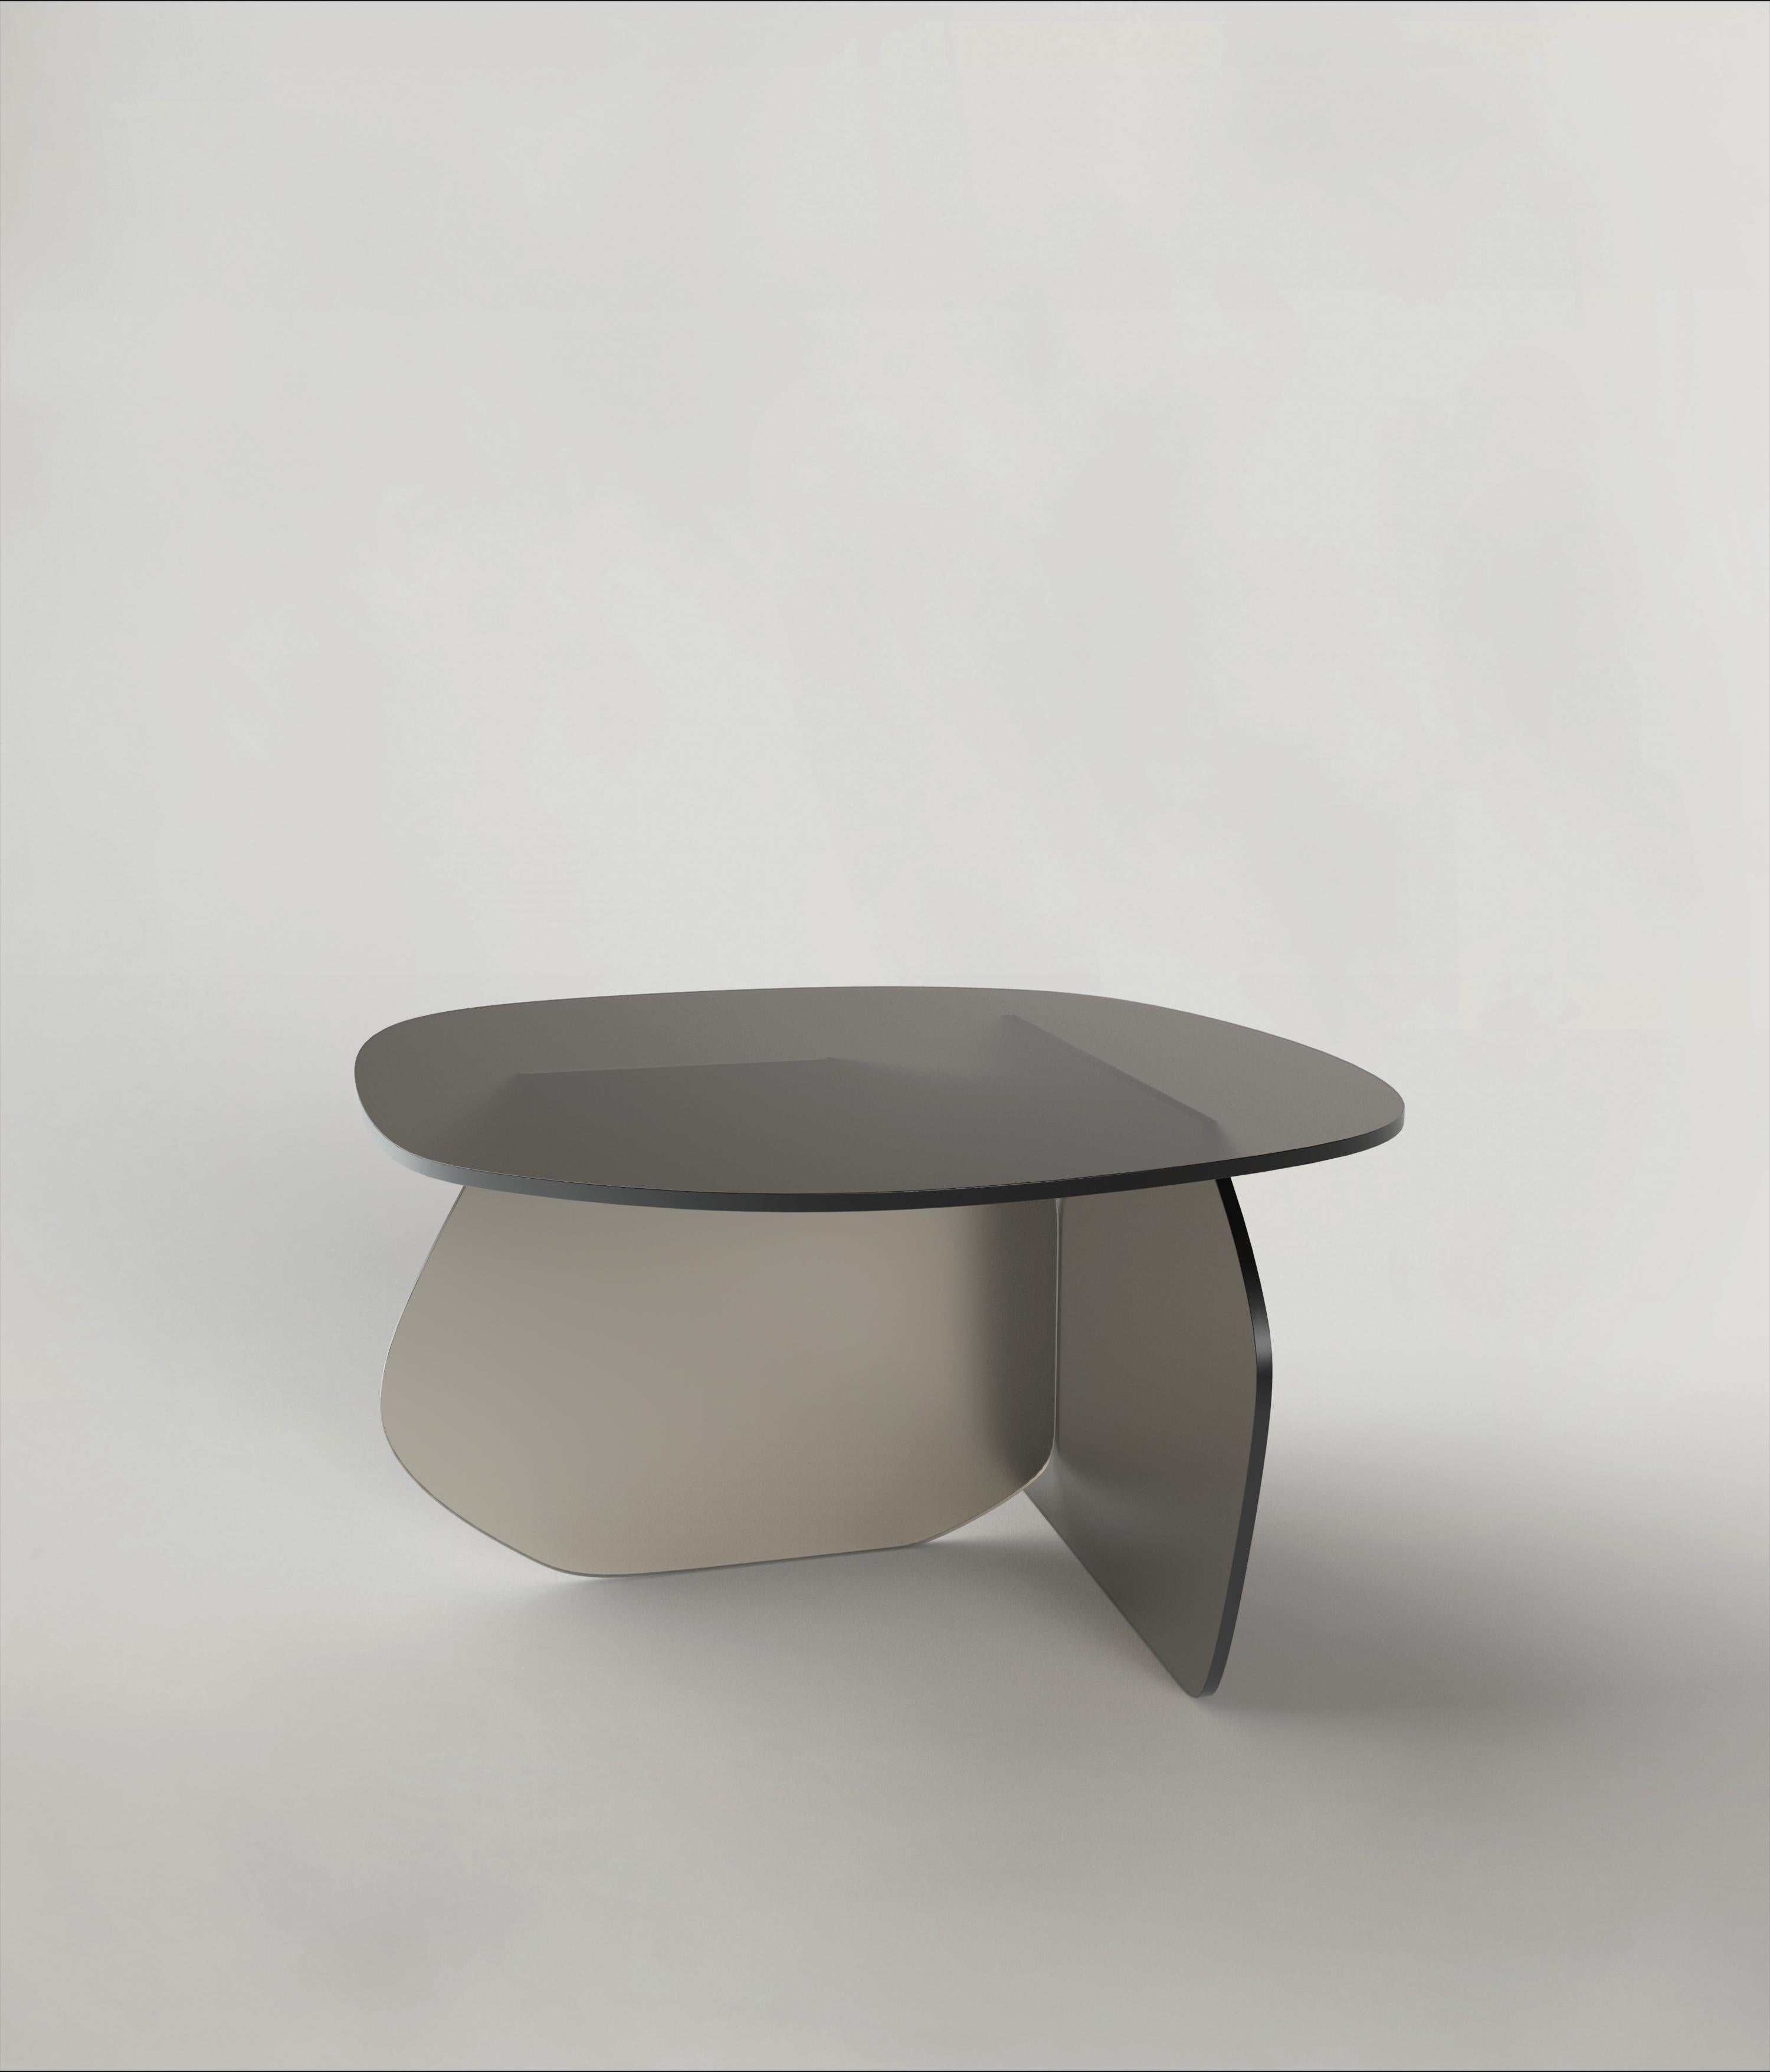 Panorama V2 Coffee Table by Edizione Limitata
Limited Edition of 1000 pieces. Signed and numbered.
Dimensions: D60x W59 x H33 cm
Materials: Grey Satin Glass

Panorama V1 and V2 are respectively contemporary side and low table made by Italian